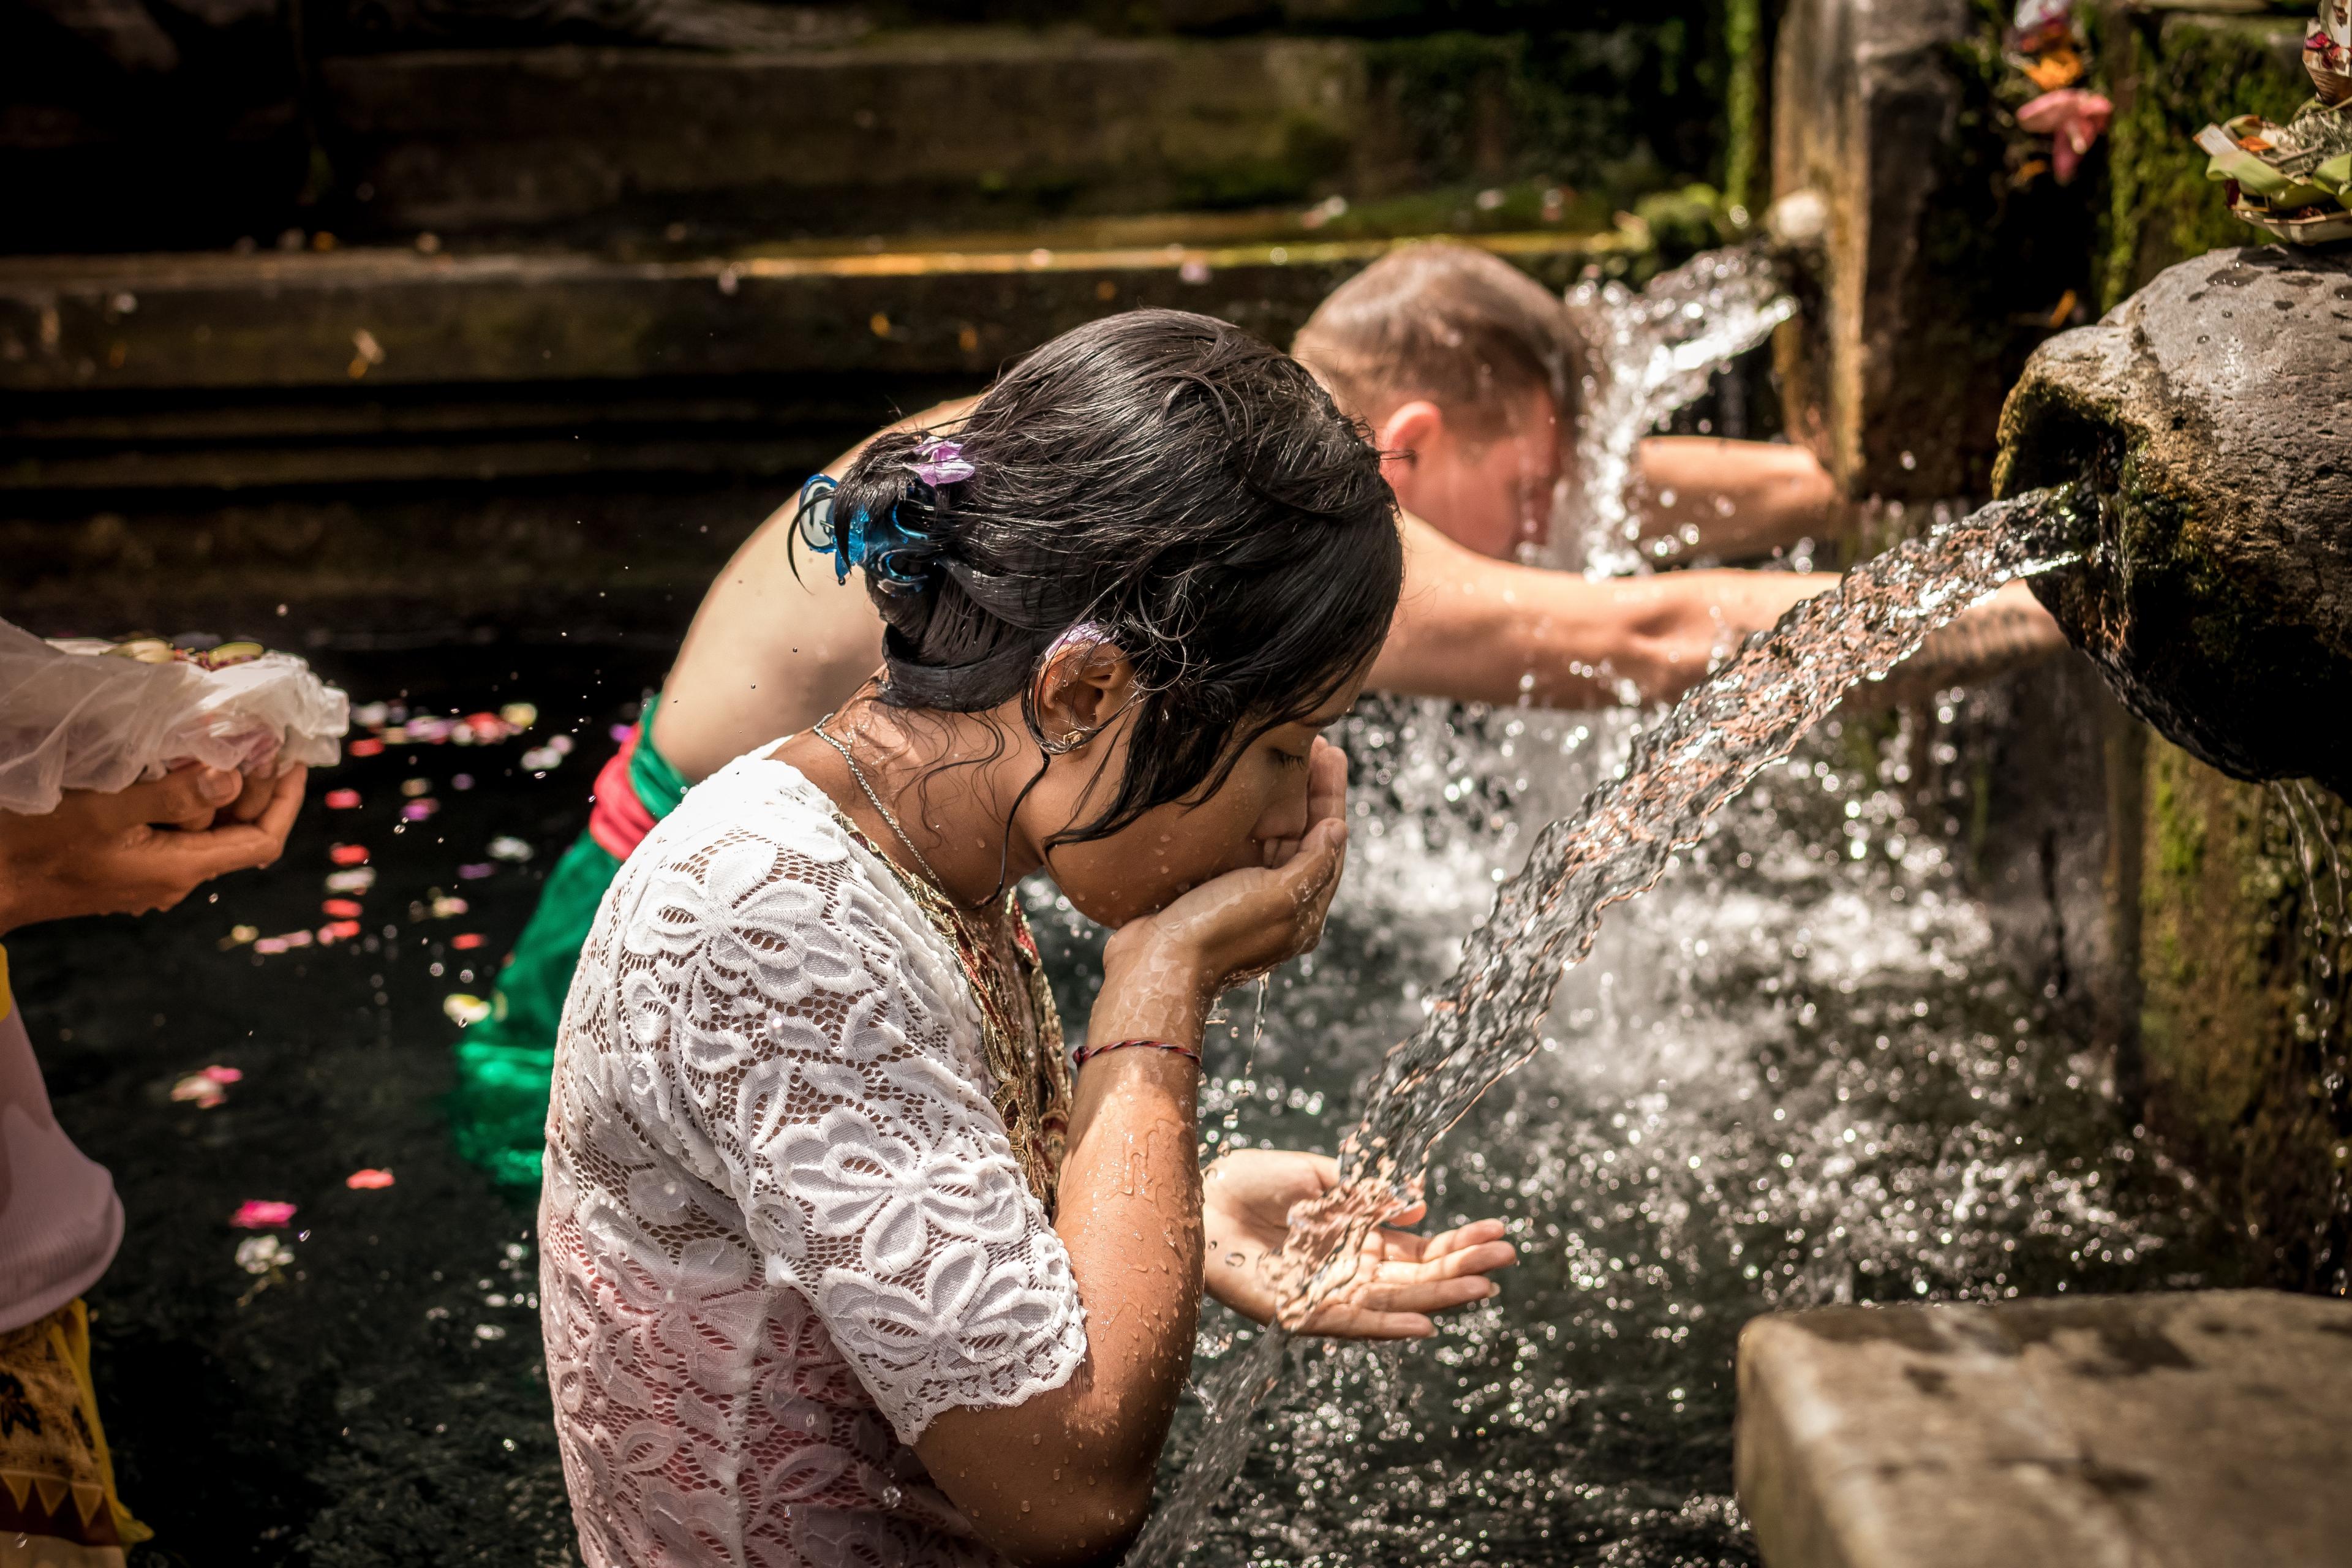 People praying in the Tirta Empul temple (Bali, Indonesia), submerged to the waist in water and bowing before fountains that are pouring out water.